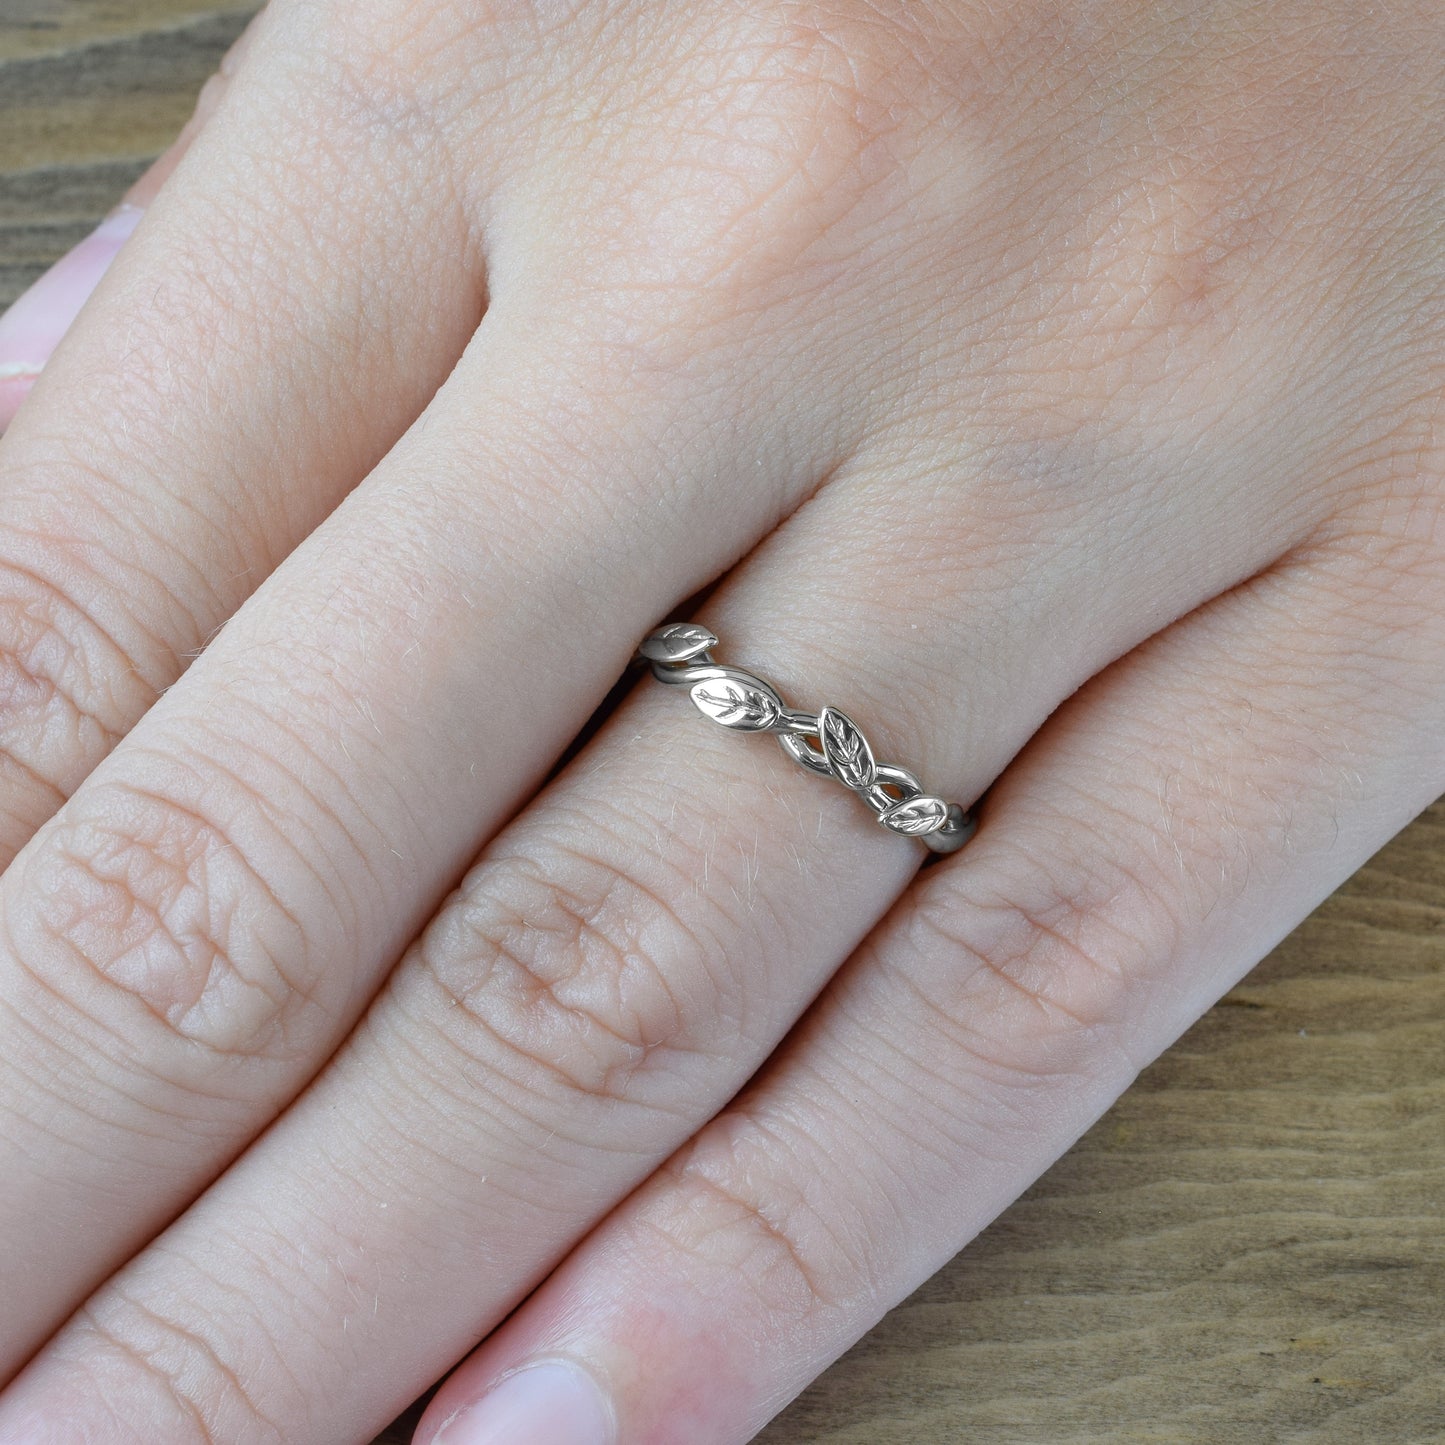 intertwined vine ring with leaves in white gold on finger